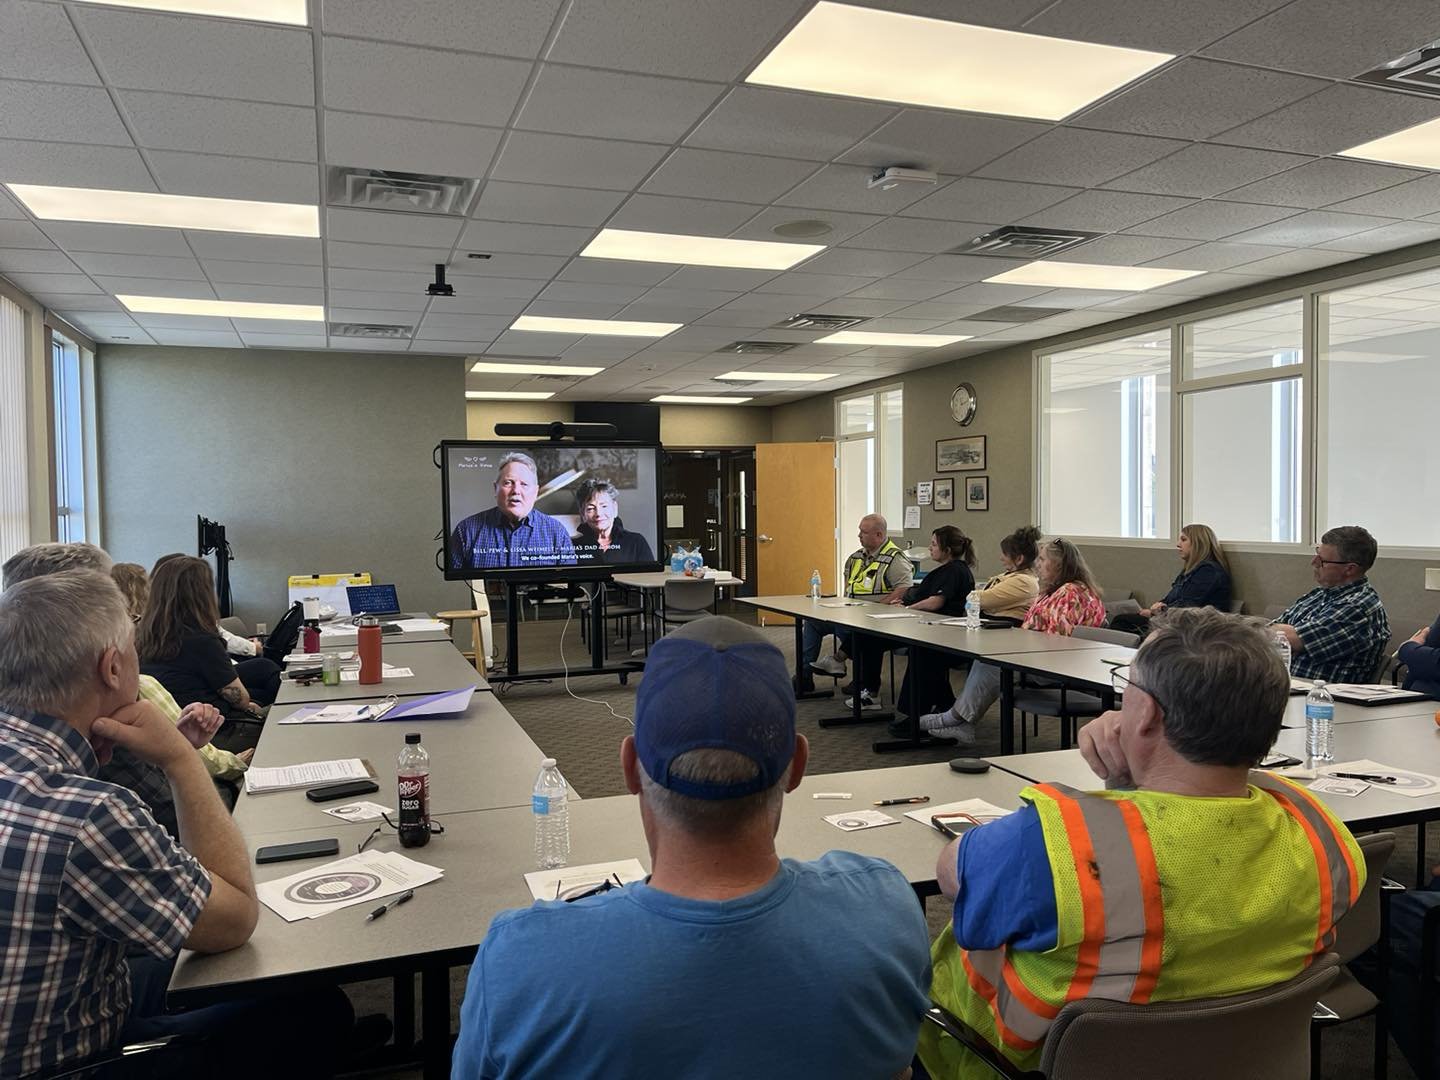 Enjoyed DV prevention training at our latest Prevention Network partner City of Anoka, Minnesota! Thank you so much for your time and attention this morning we are grateful to have such an engaged group.